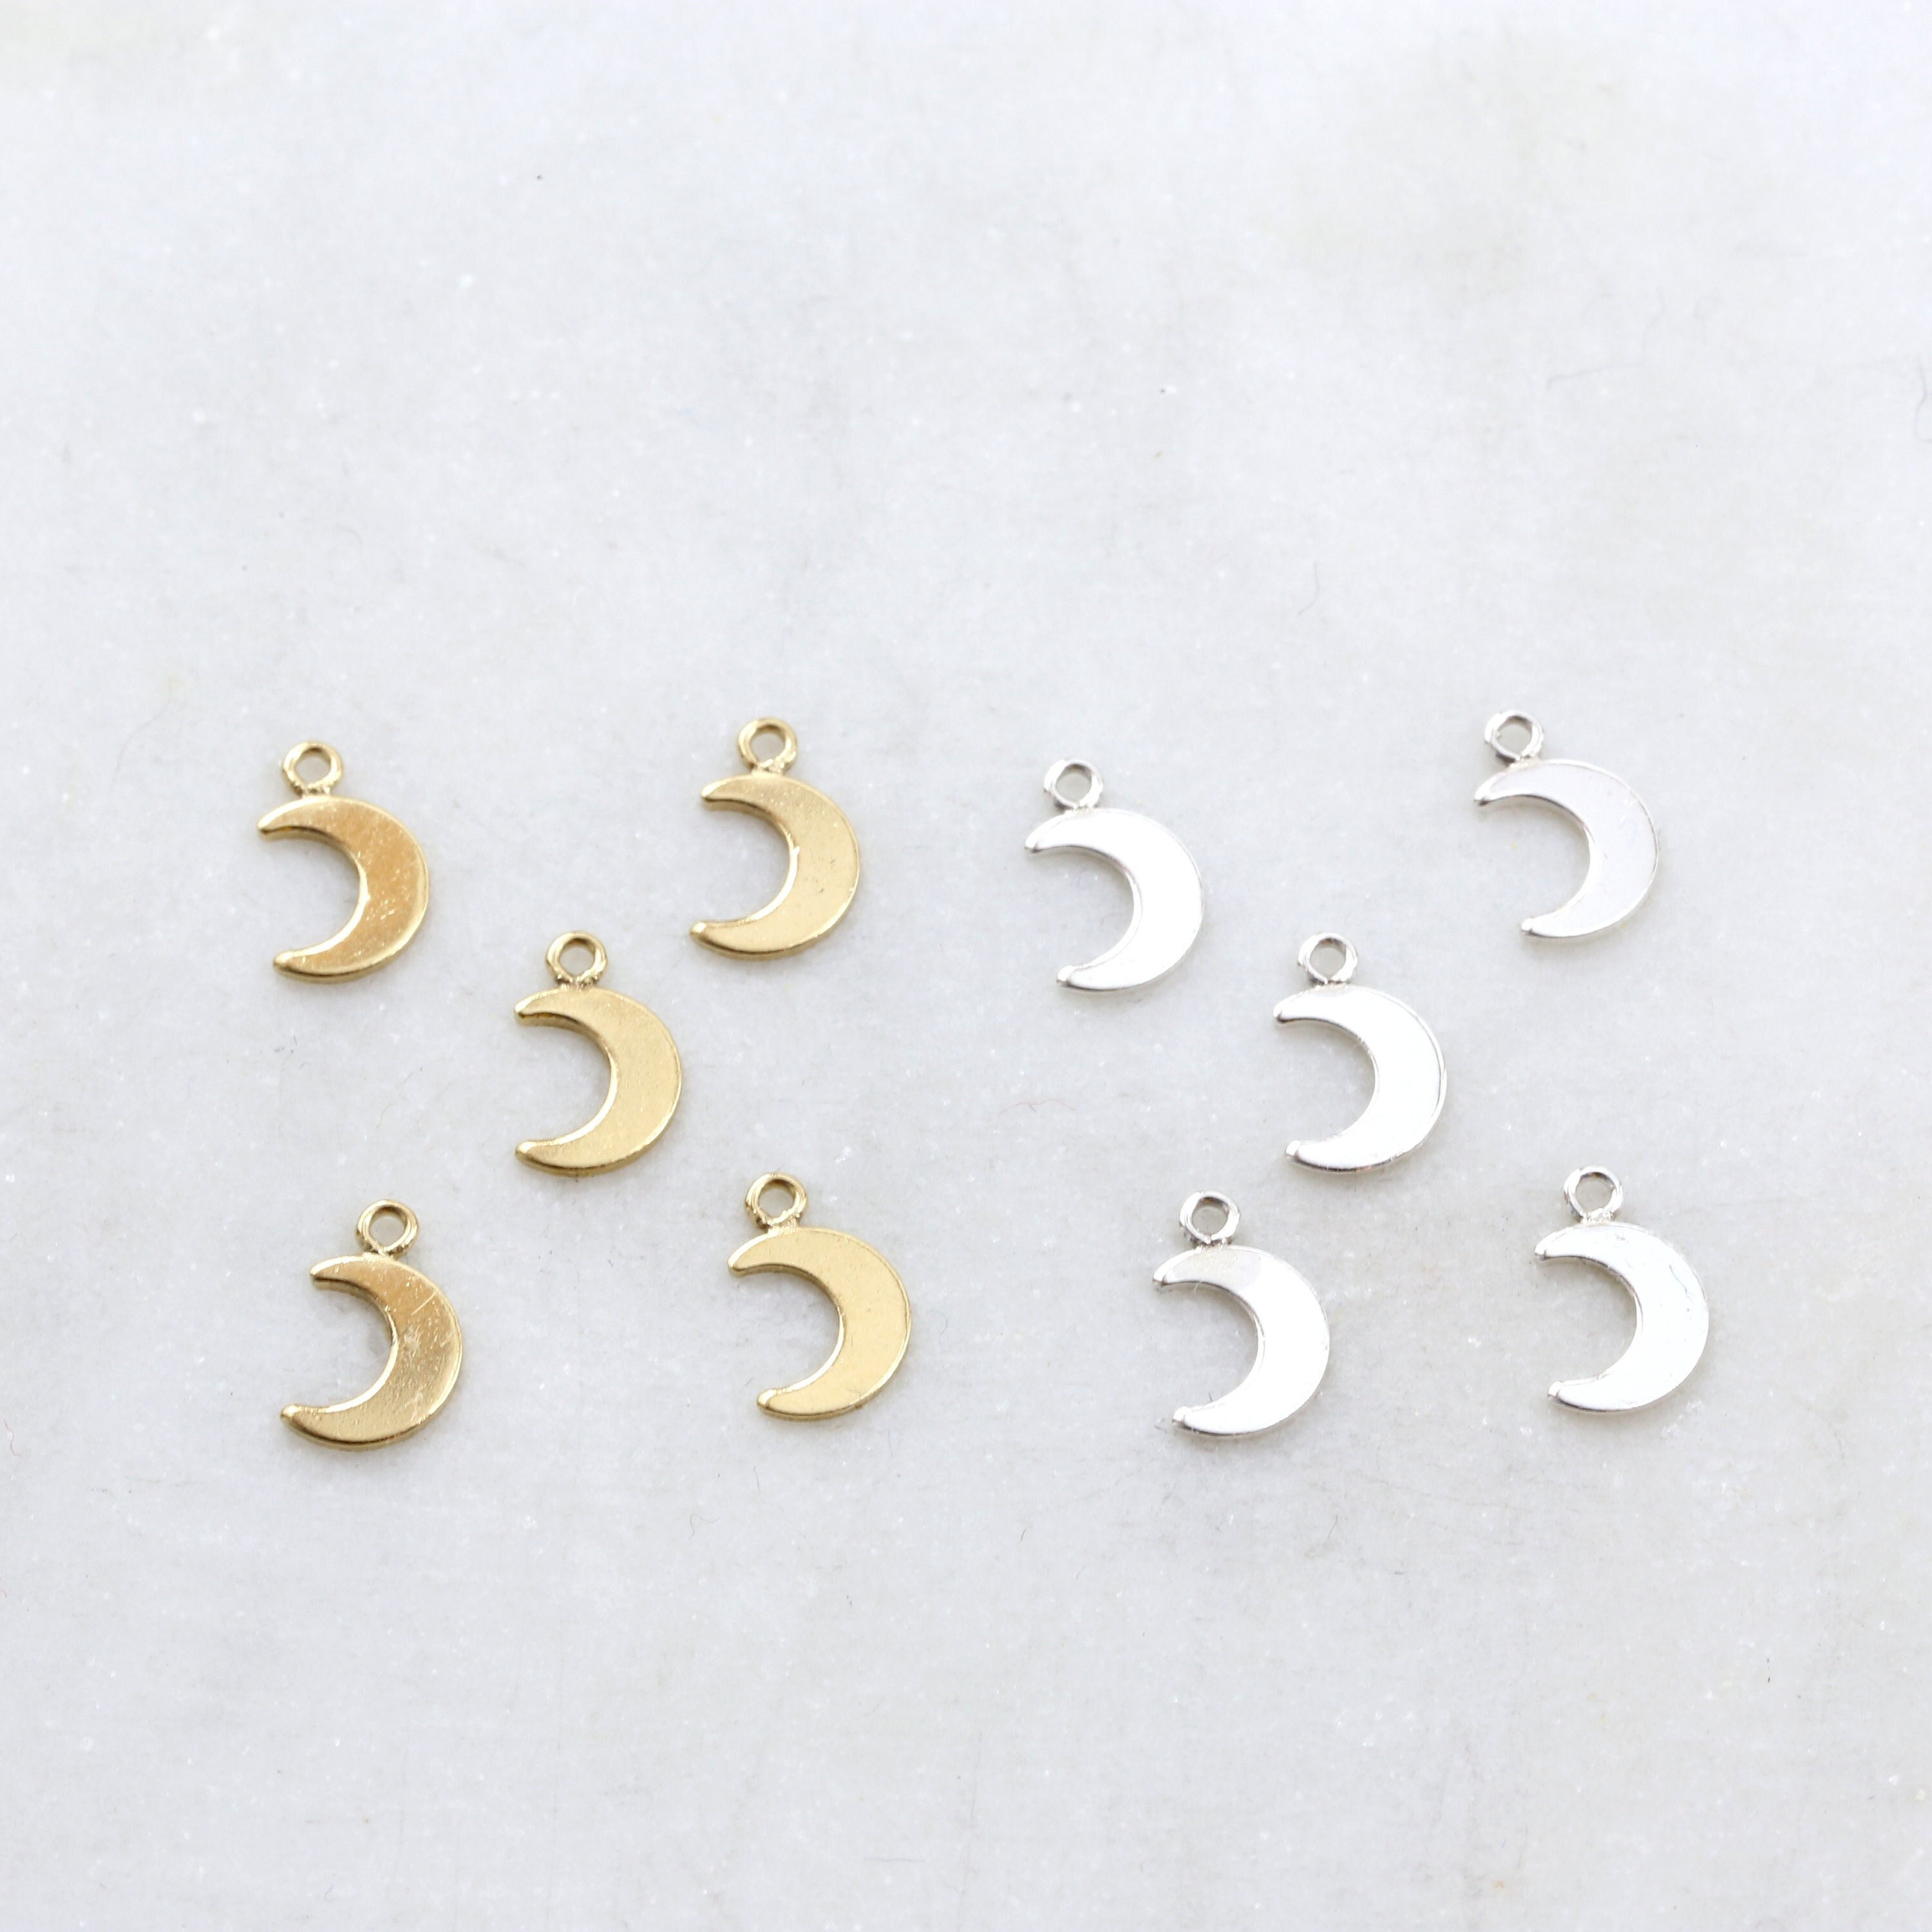 2 Pc Bag of 11.5 mm 14K Gold Filled Moon Wire Charm